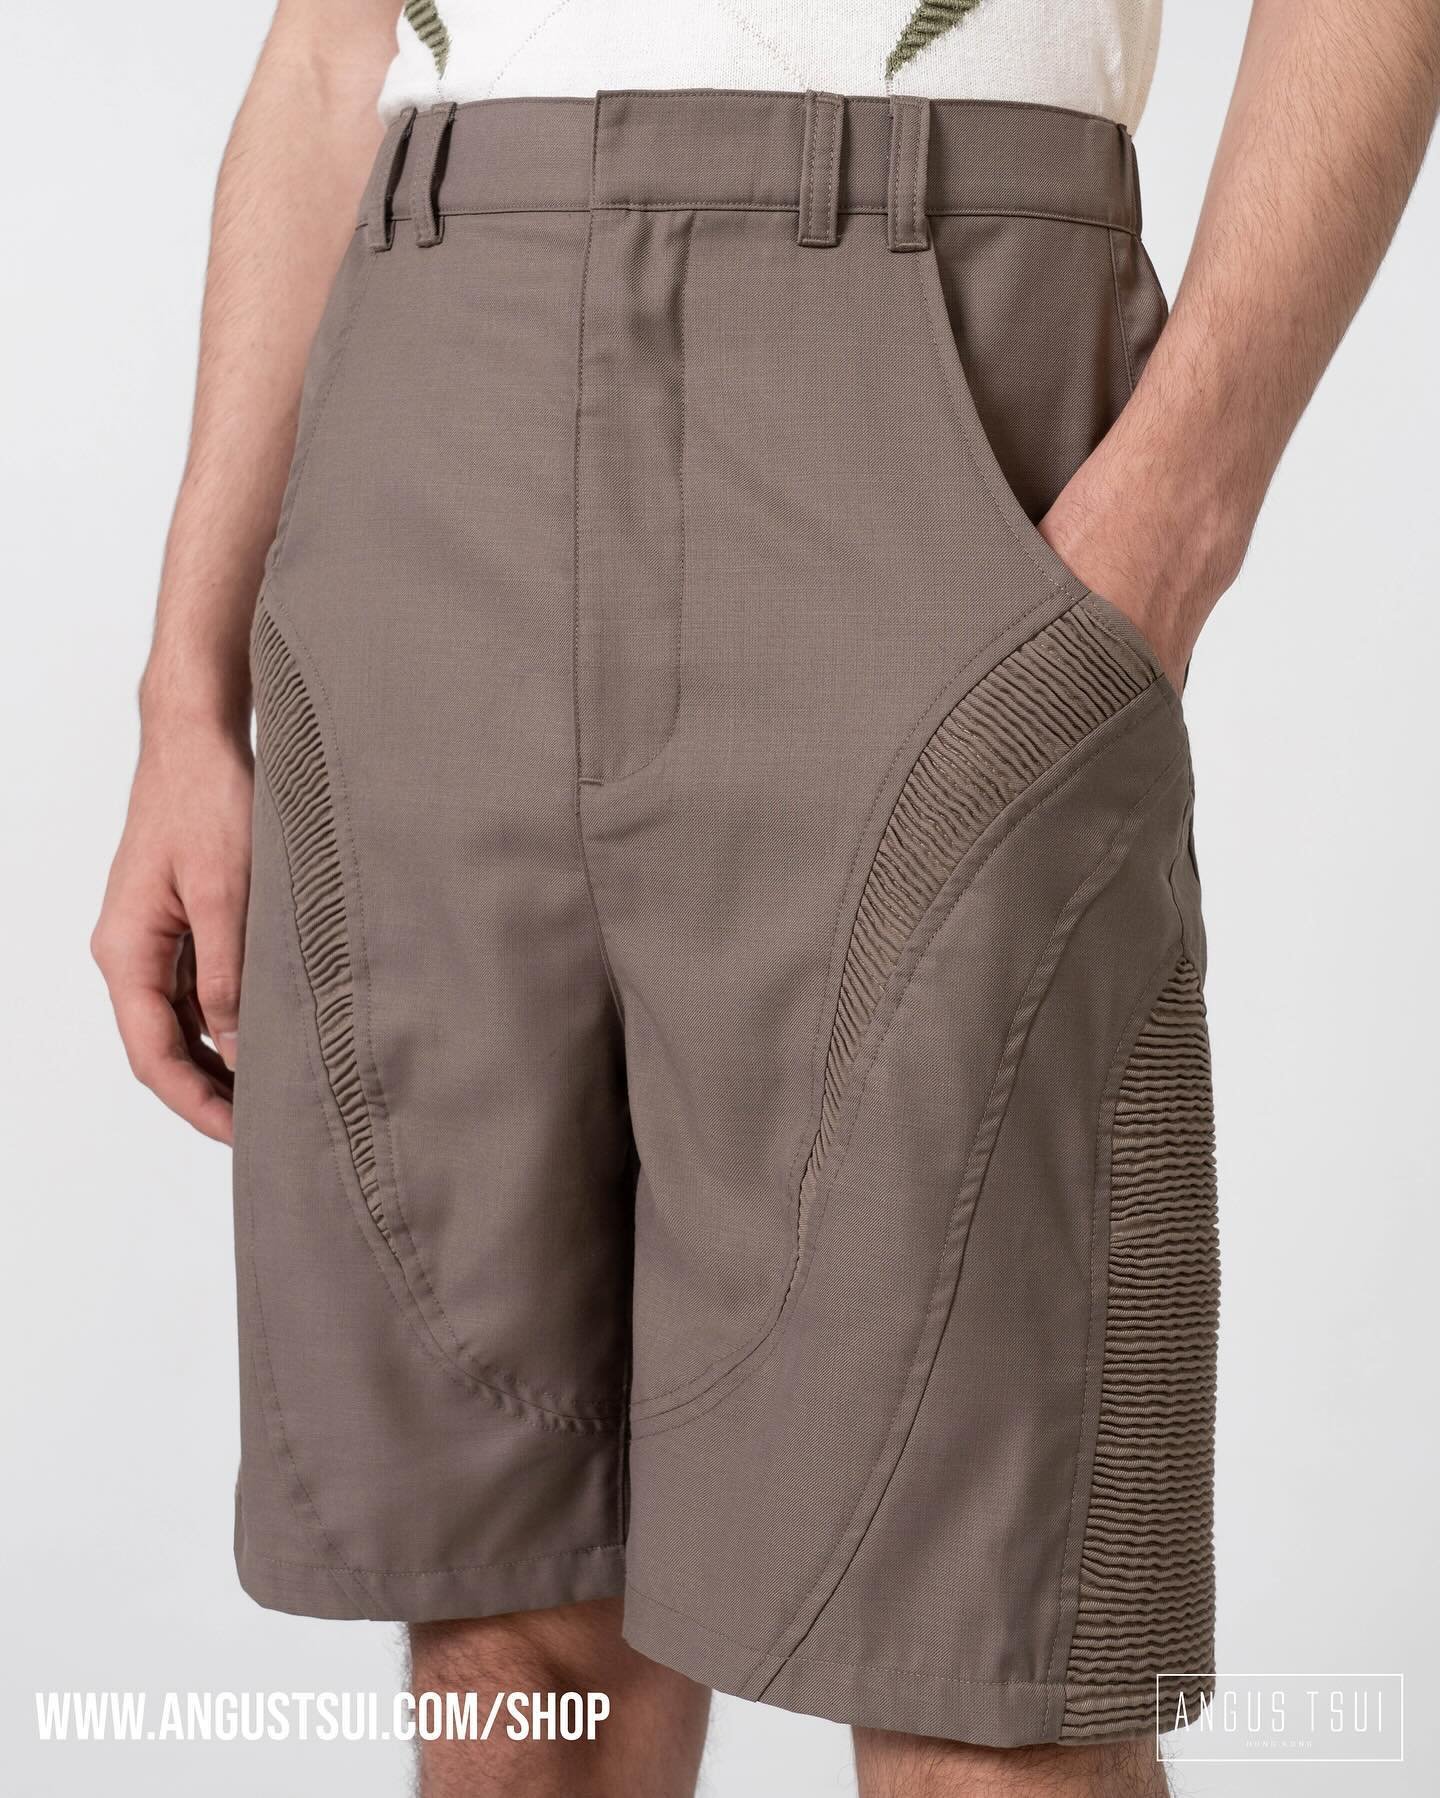 Signature Multi-Panelled Shorts ‣

These otherworldly exoskeleton shorts are made from a Dune Beige extra fine supreme wool fabric. Unique multi-panel pattern cutting designs enhance the signature ANGUS TSUI otherworldly constructed silhouette. Sculp